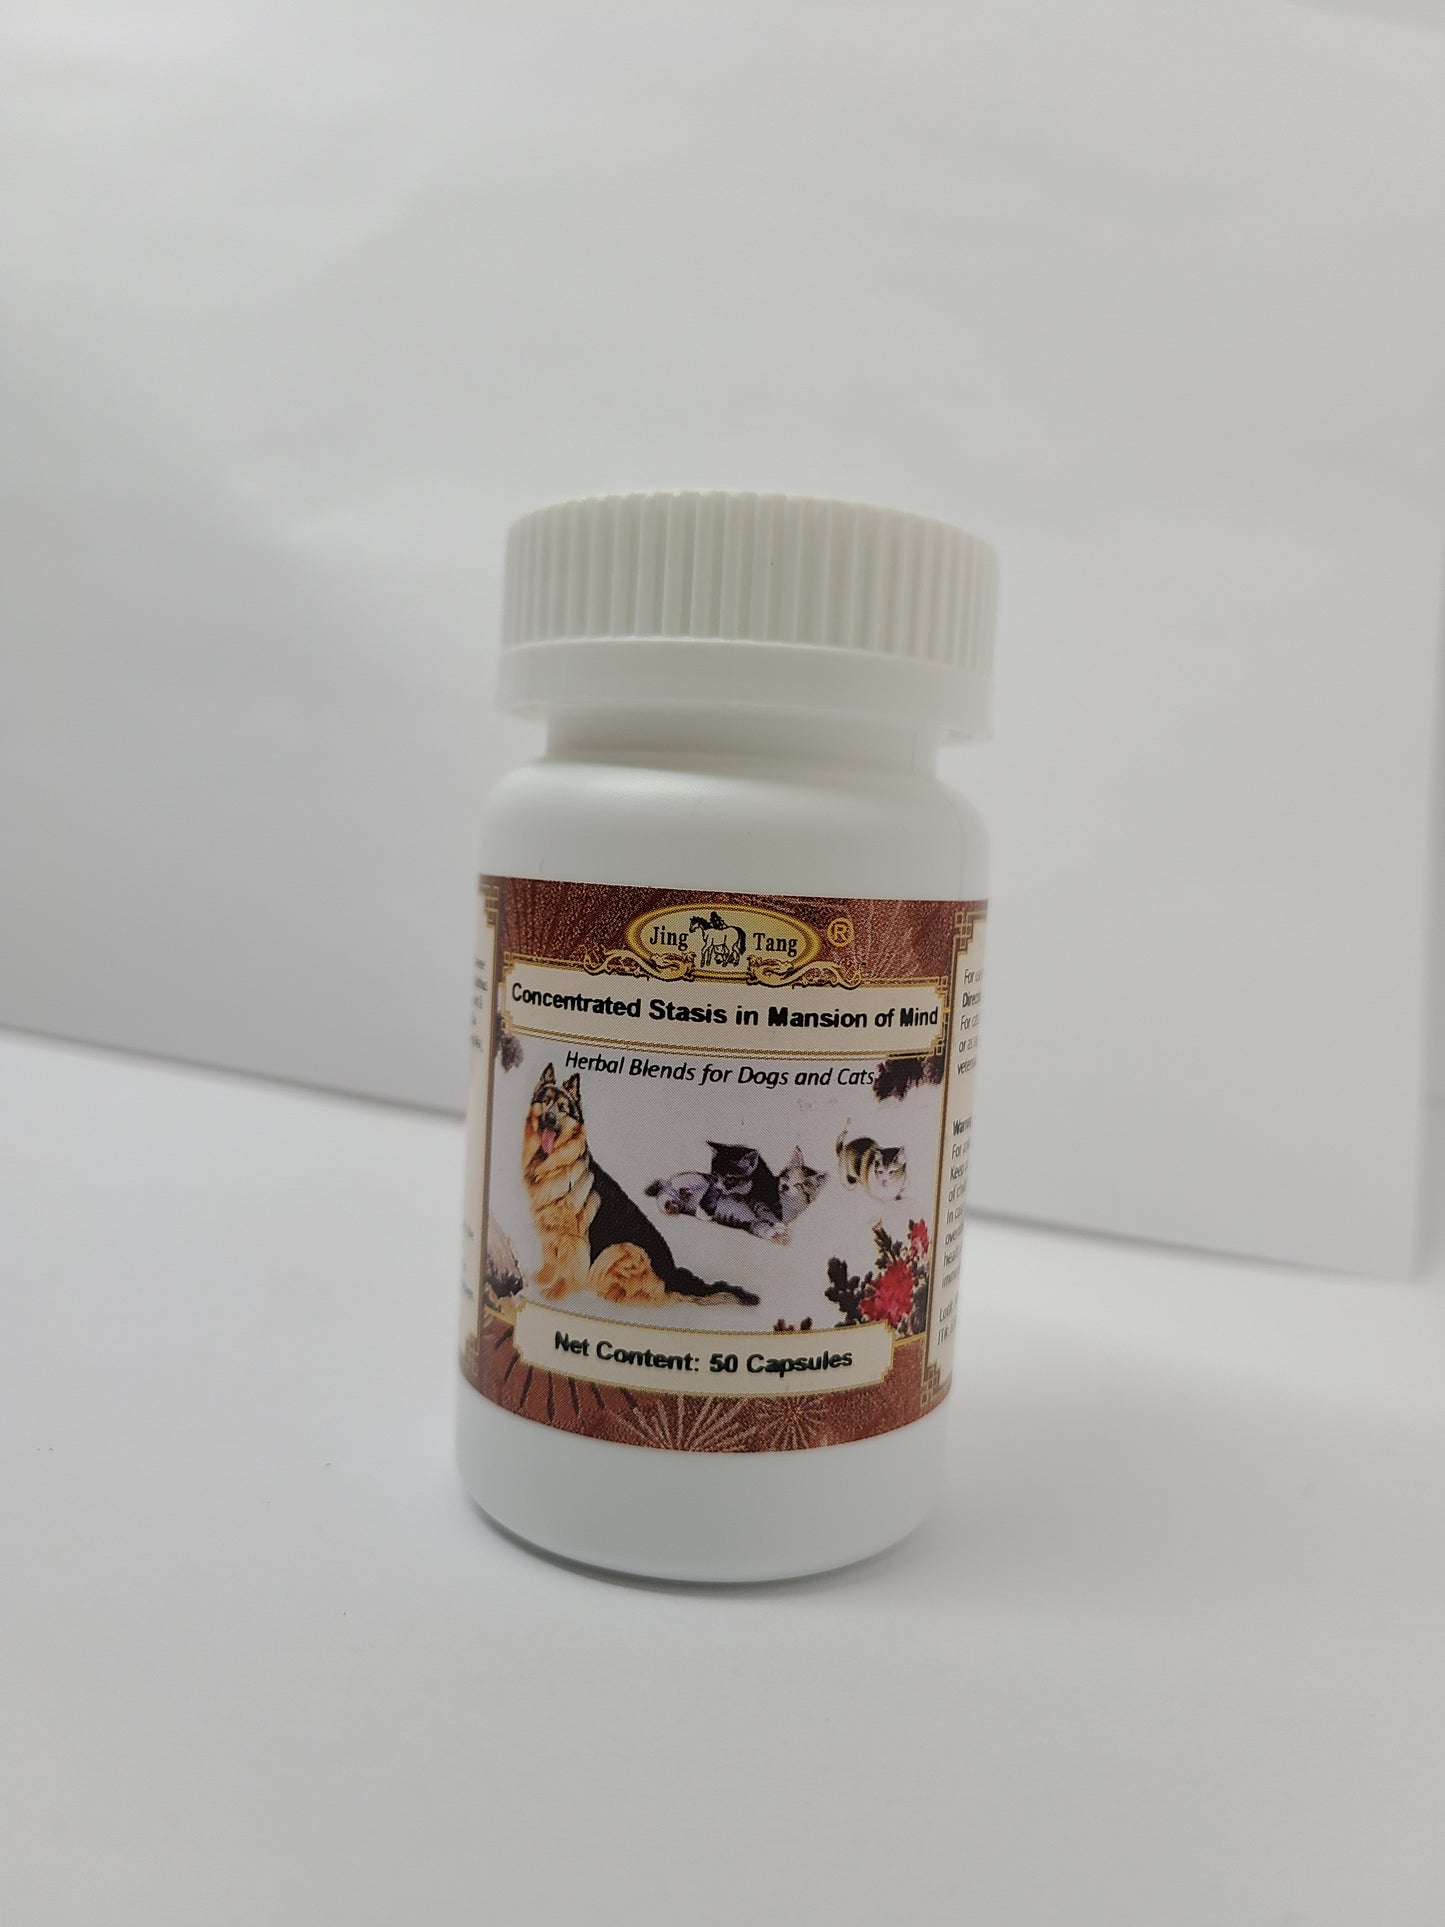 Jing Tang Herbals: Concentrated Stasis in Mansion of Mind 0.2g capsule (50 capsule bottle)